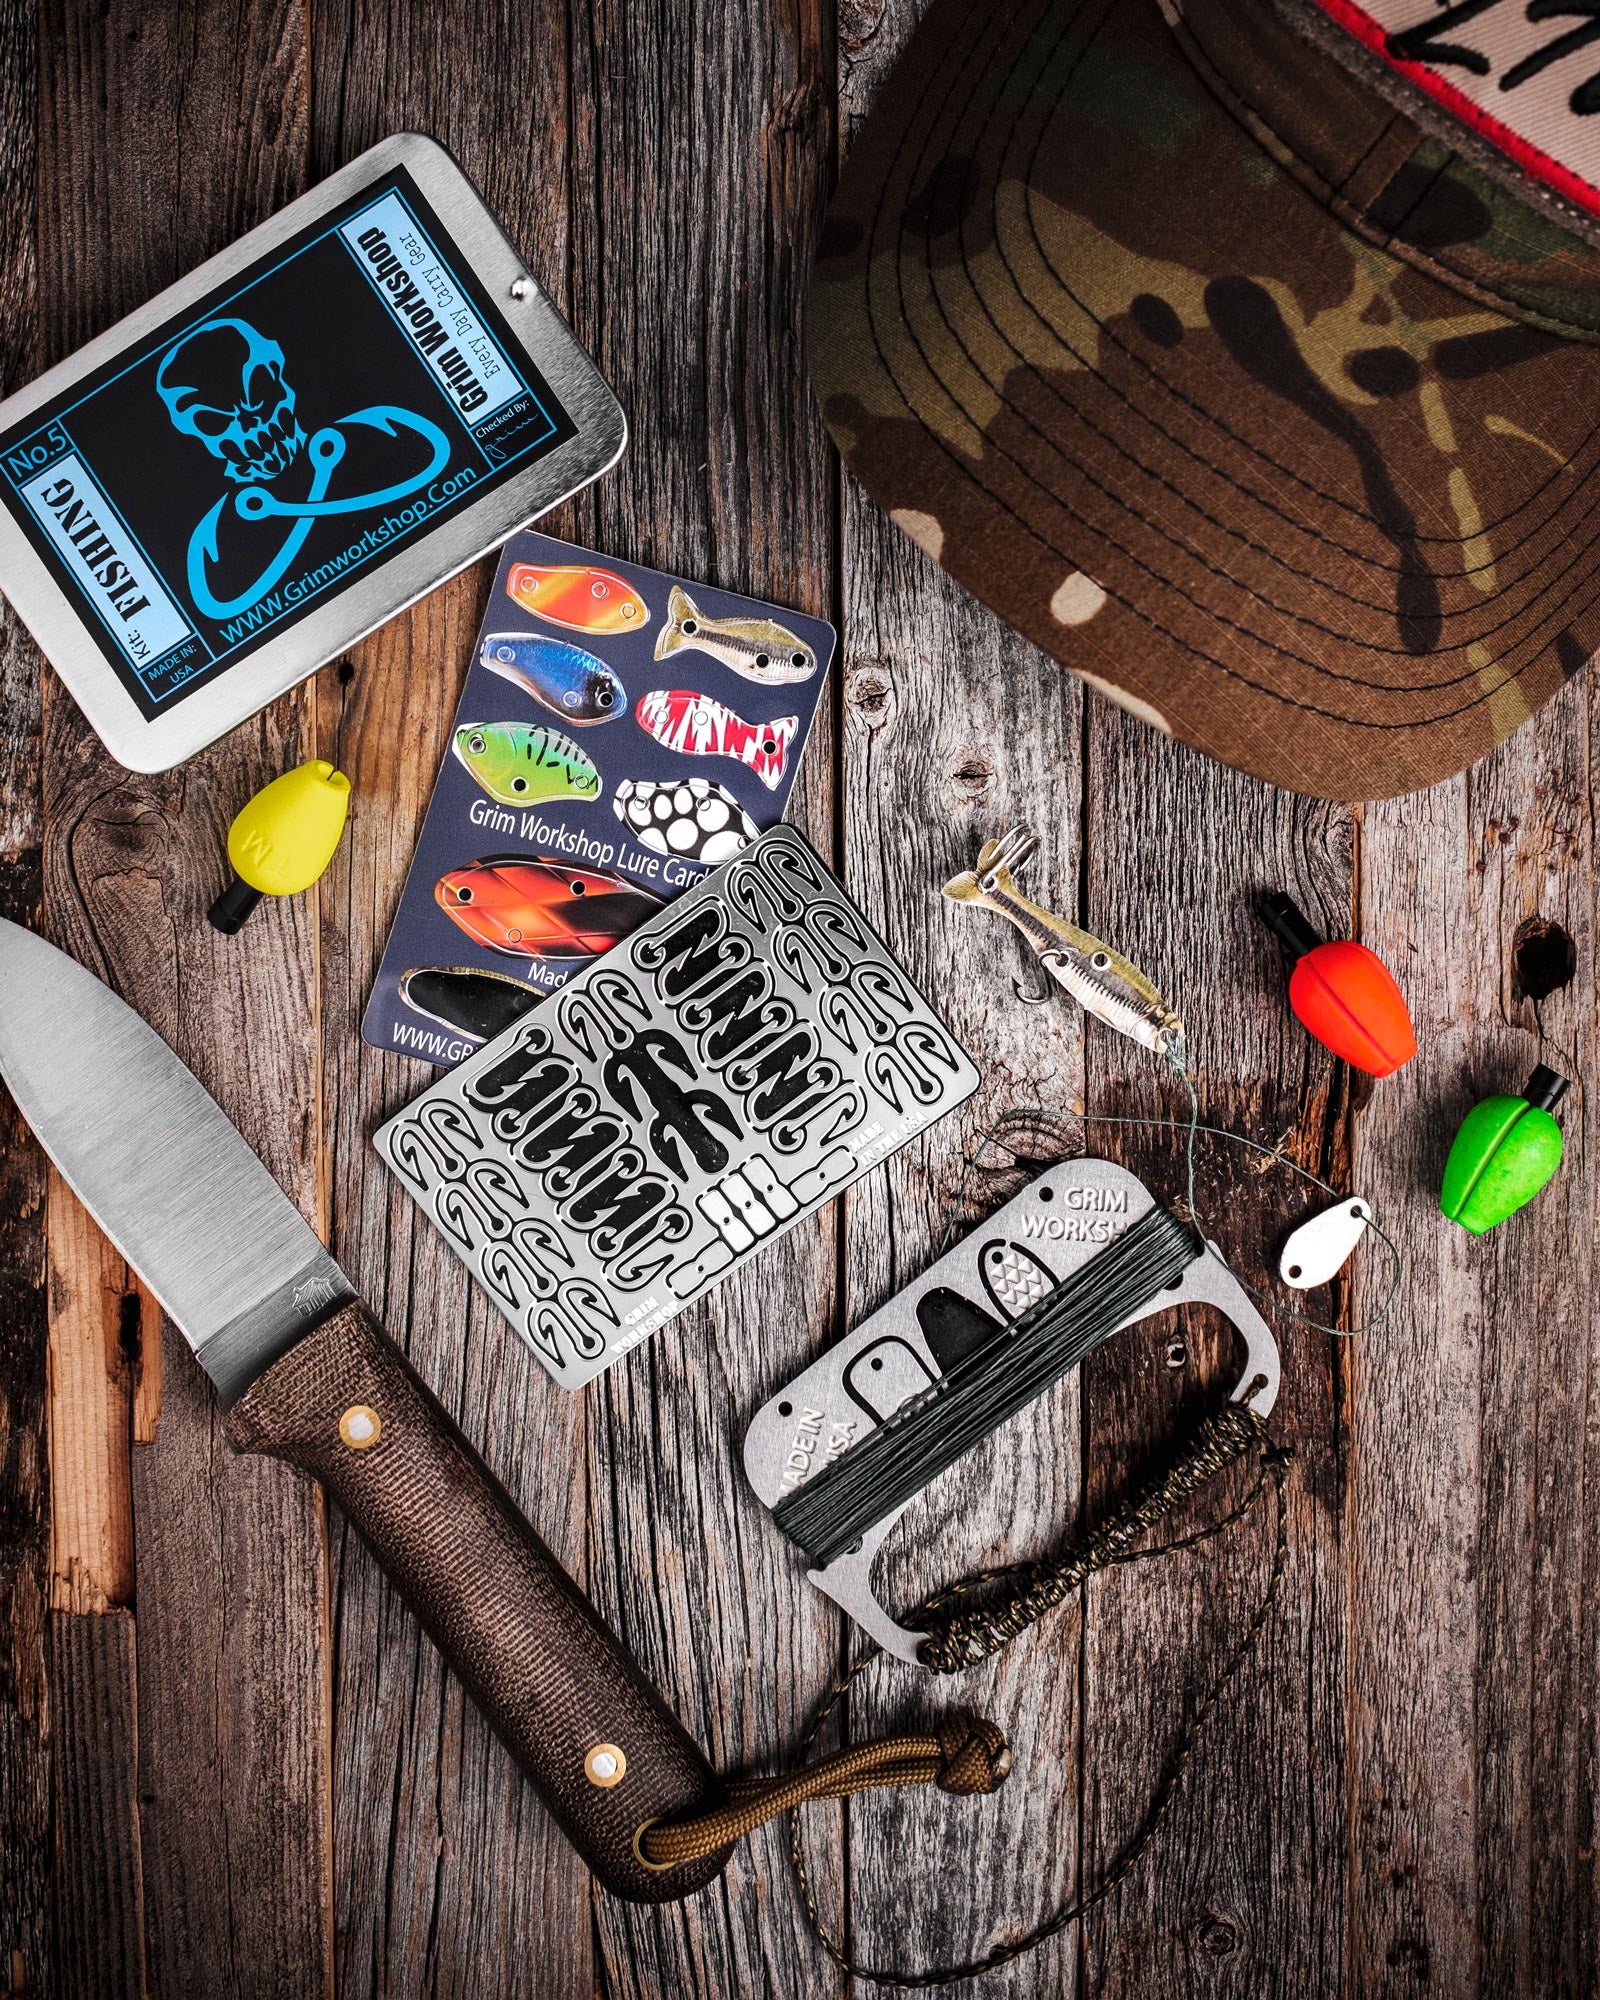 Moricher Survival Card Multitool Camping Gear with Fishing Line  Multipurpose EDC Kit for Fishing Outdoor Hiking Hunting Gift Idea 6 PCS :  : Sports & Outdoors